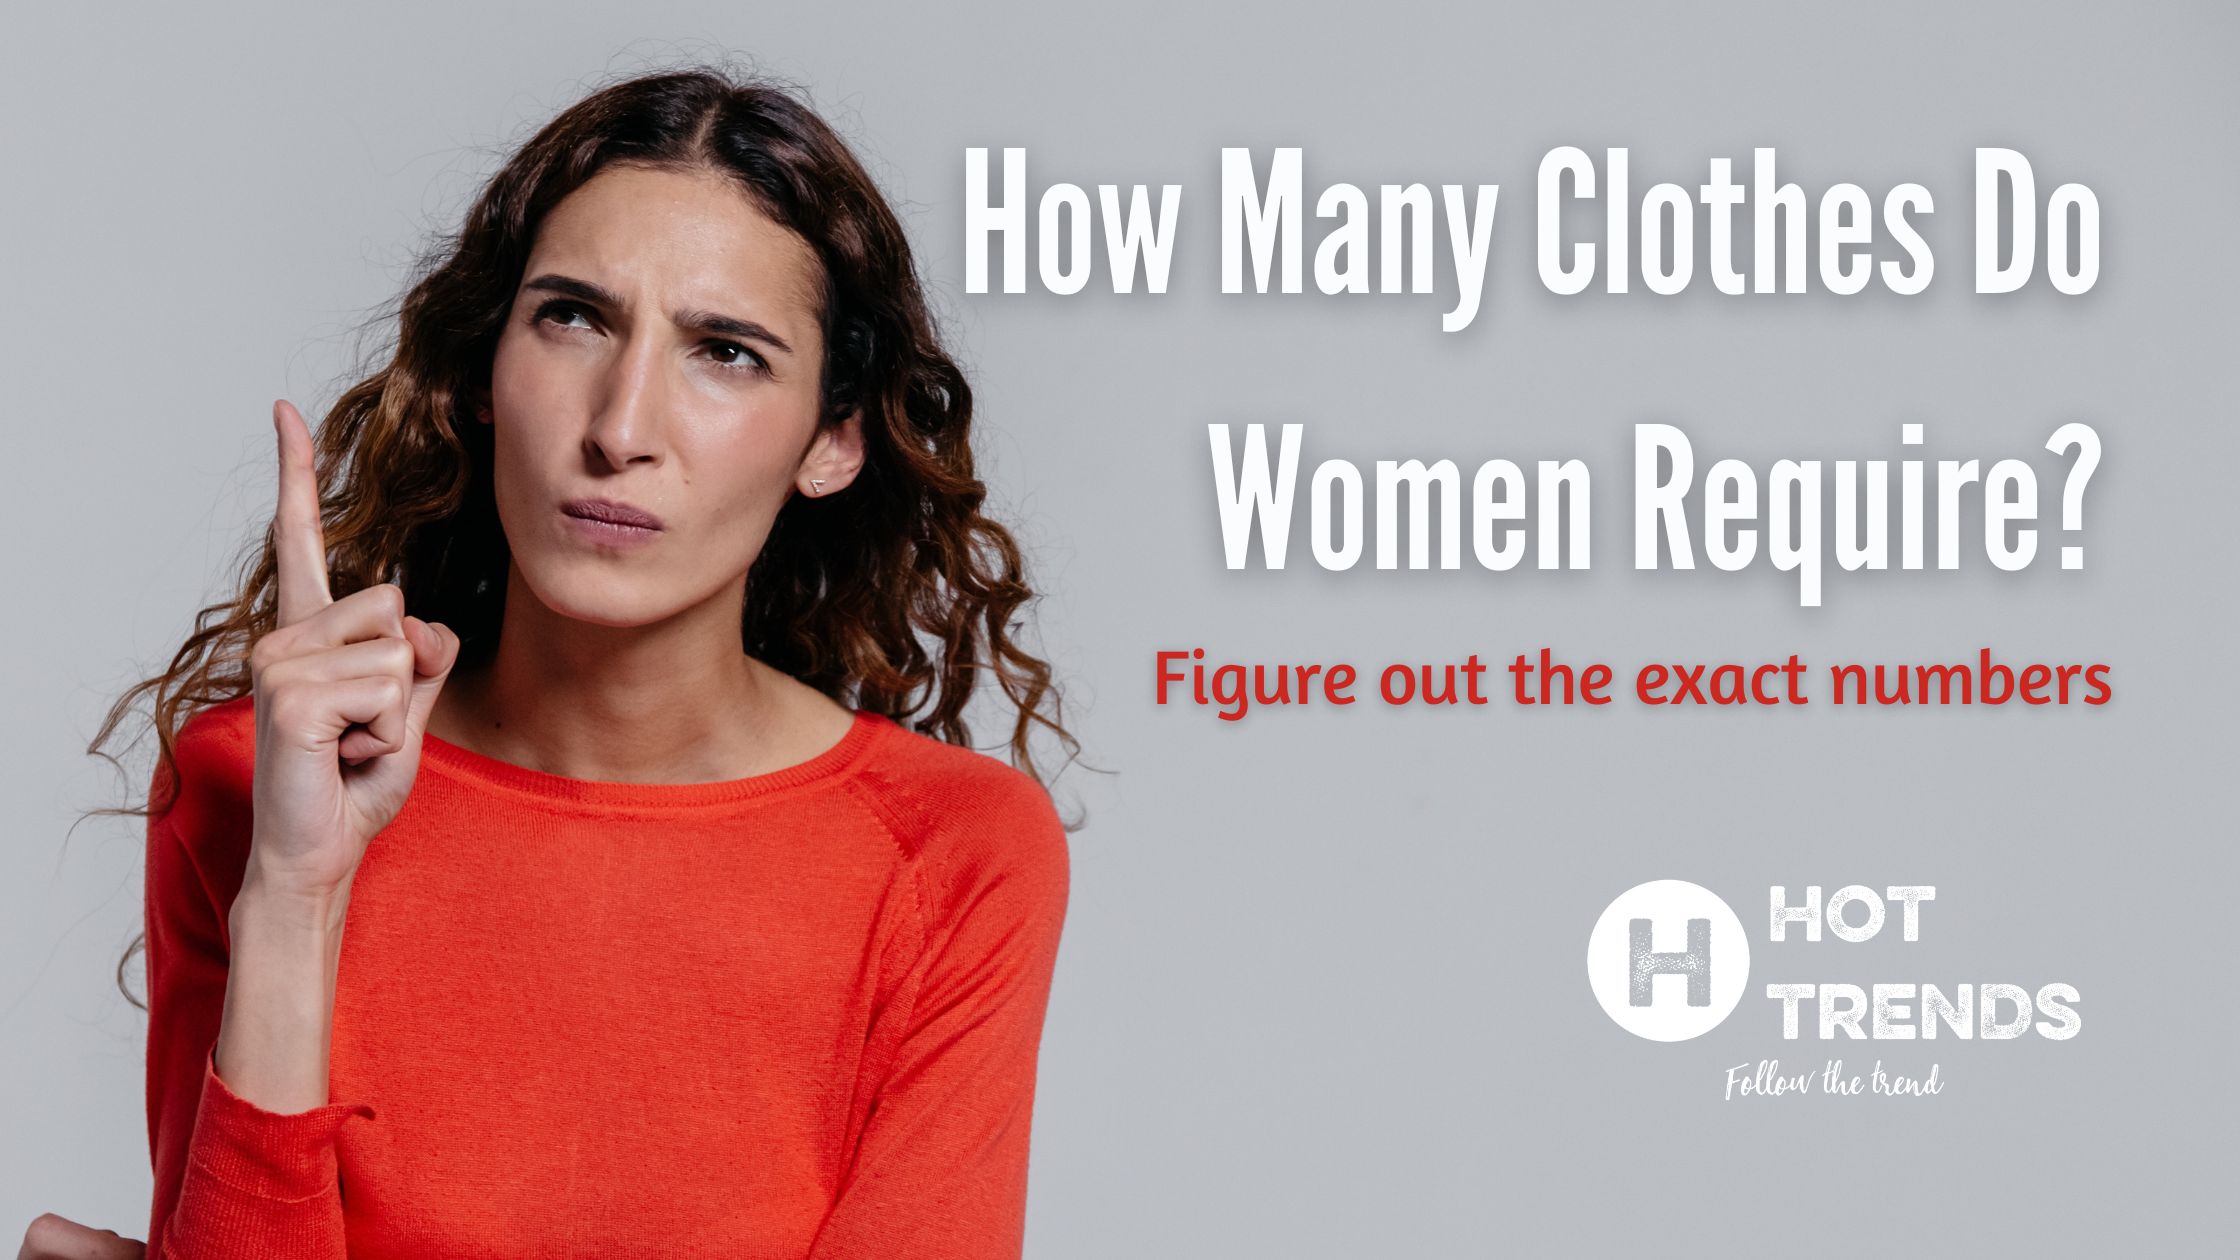 How Many Clothes Do Women Require?